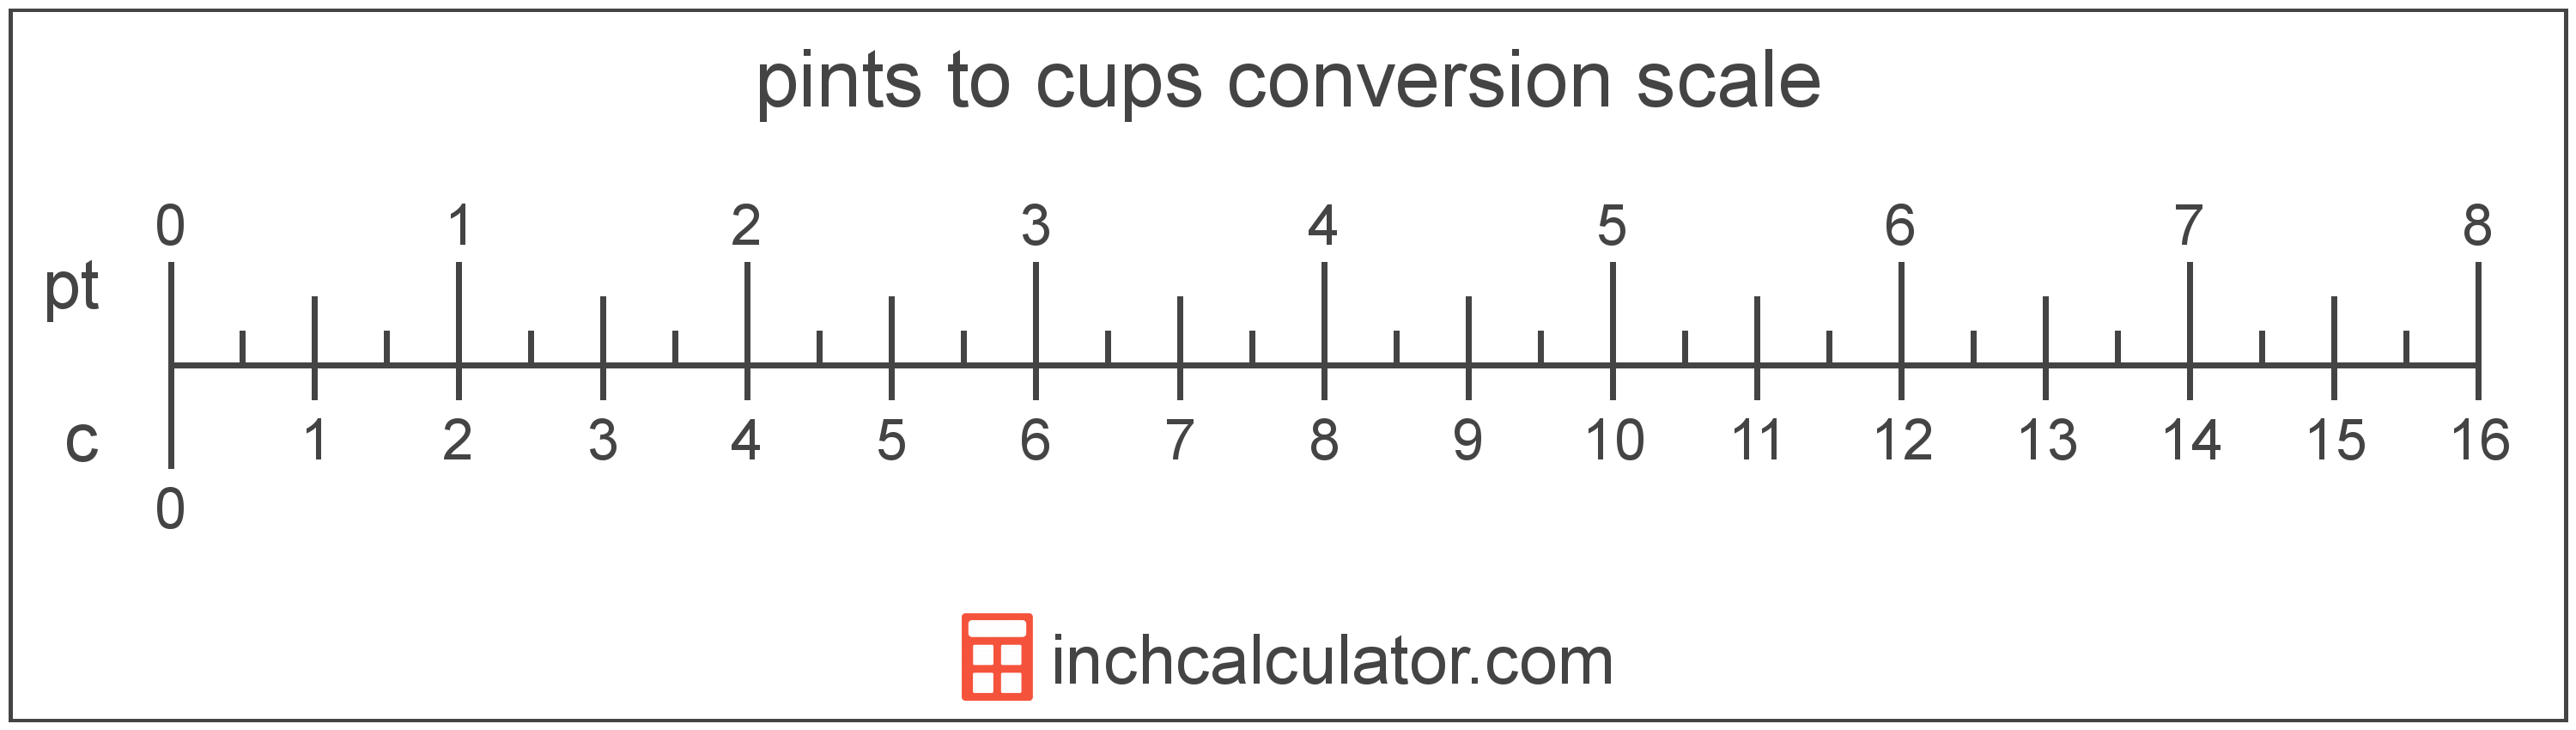 Cups To Pints Conversion C To Pt Inch Calculator